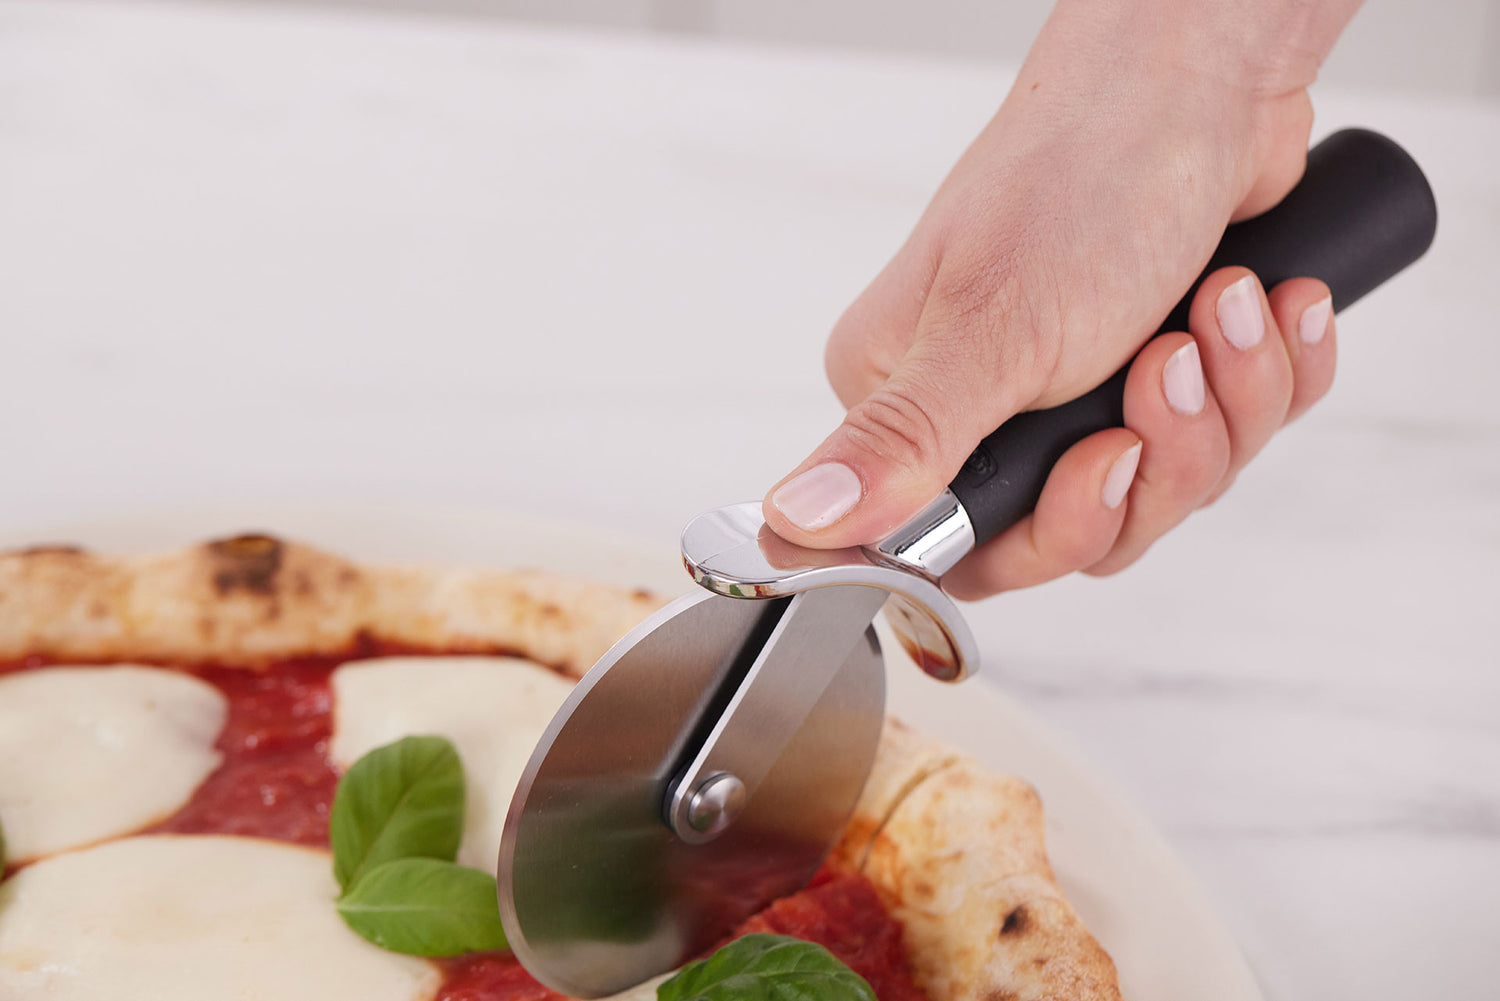 Hand slicing pizza with a Gorilla Grip pizza cutter, precise and easy to handle